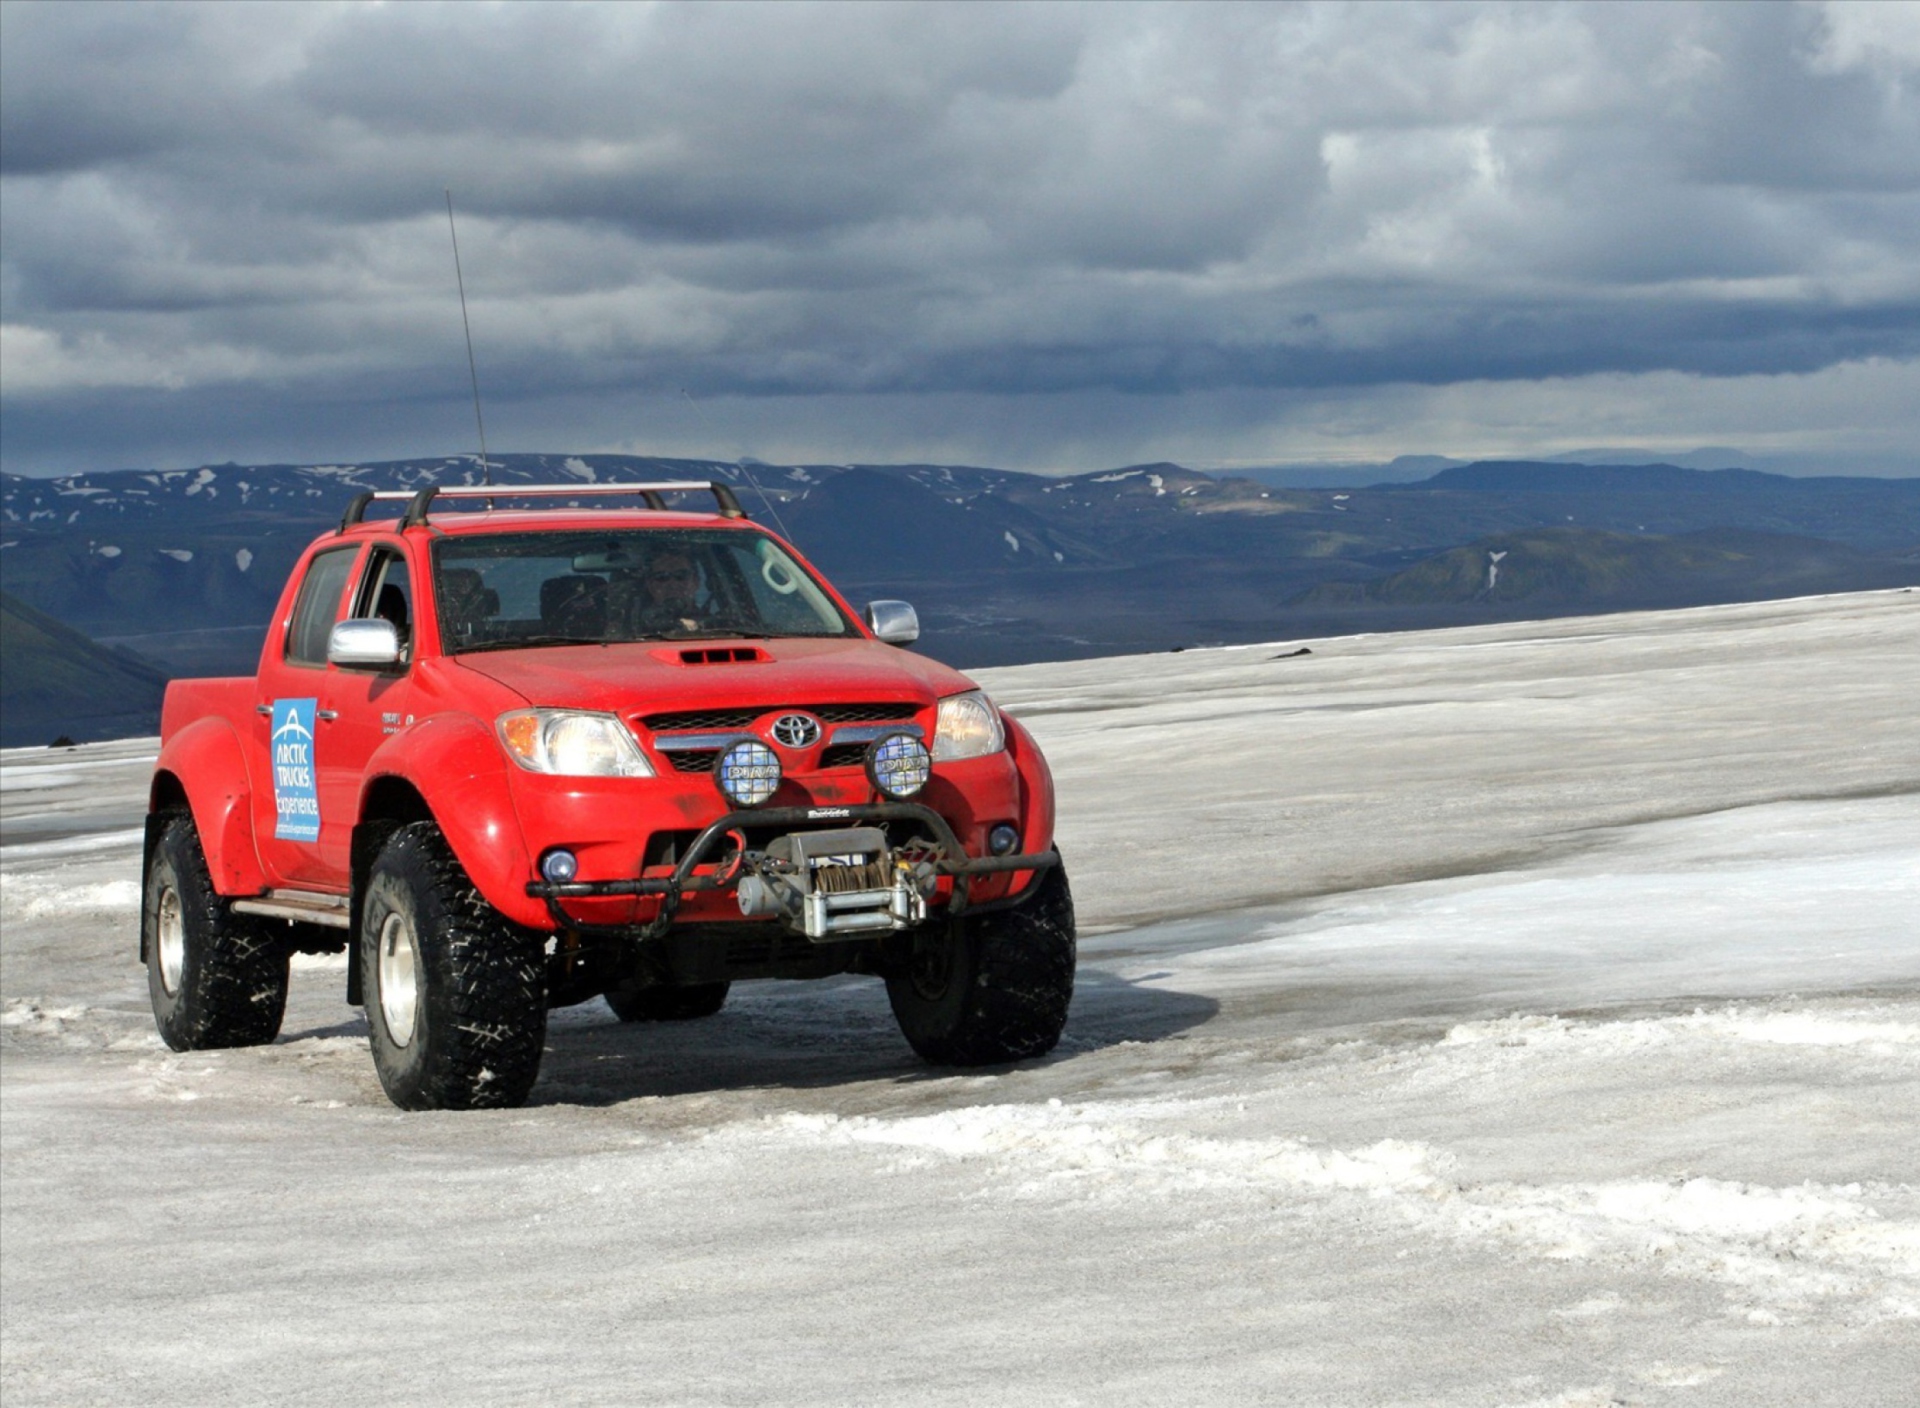 Toyota Hilux Tuning wallpaper 1920x1408